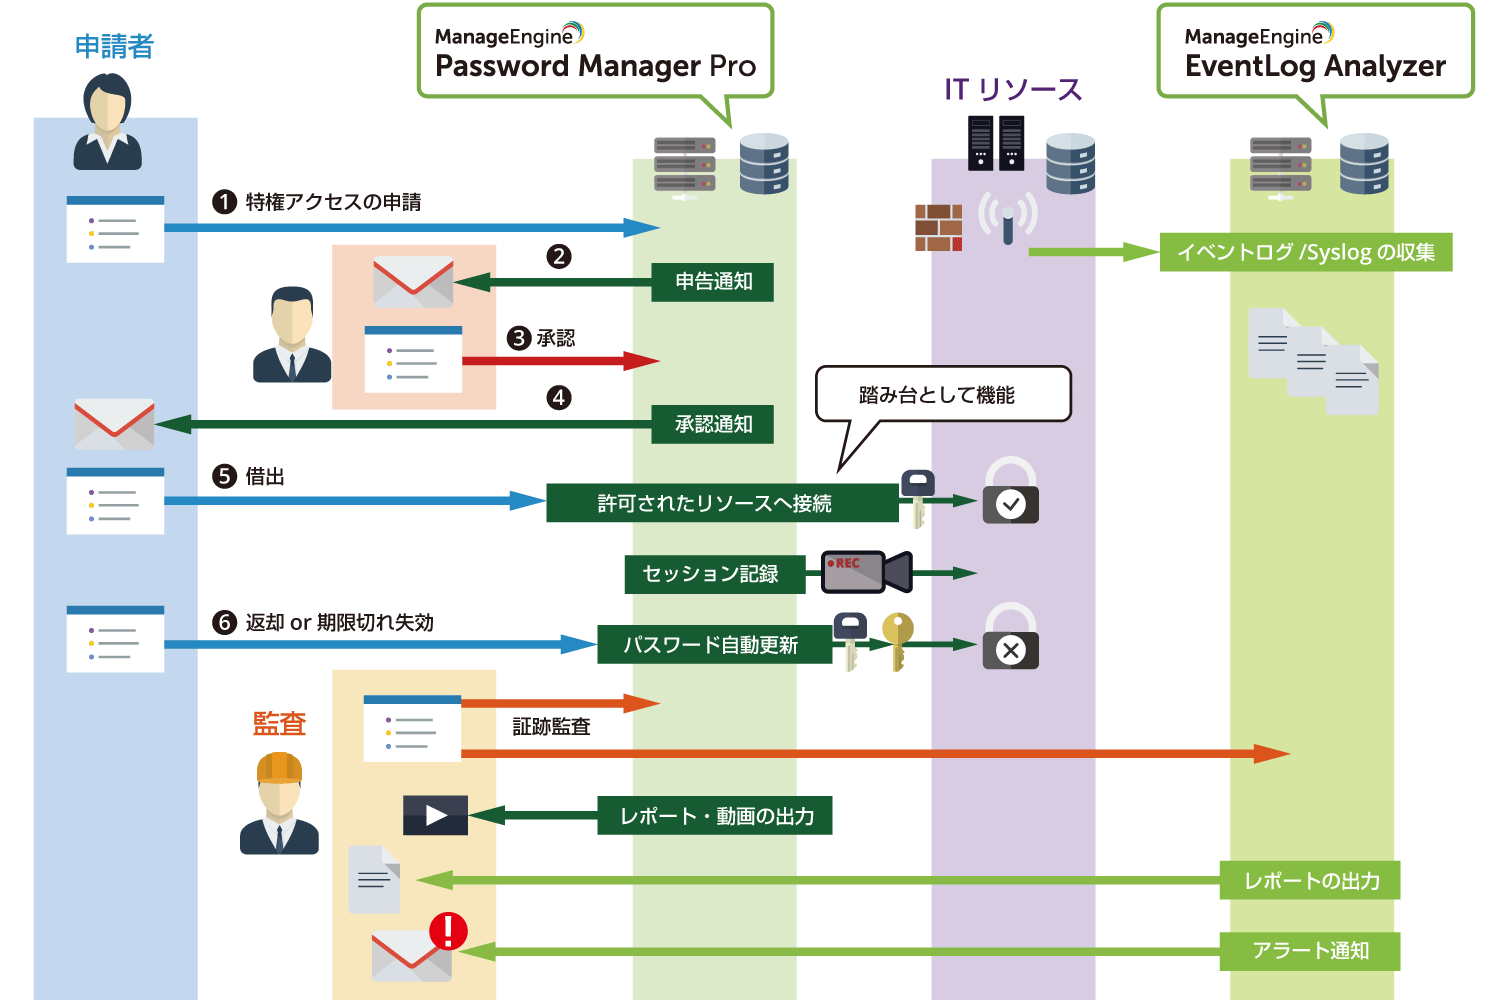 Password Manager Pro利用イメージ